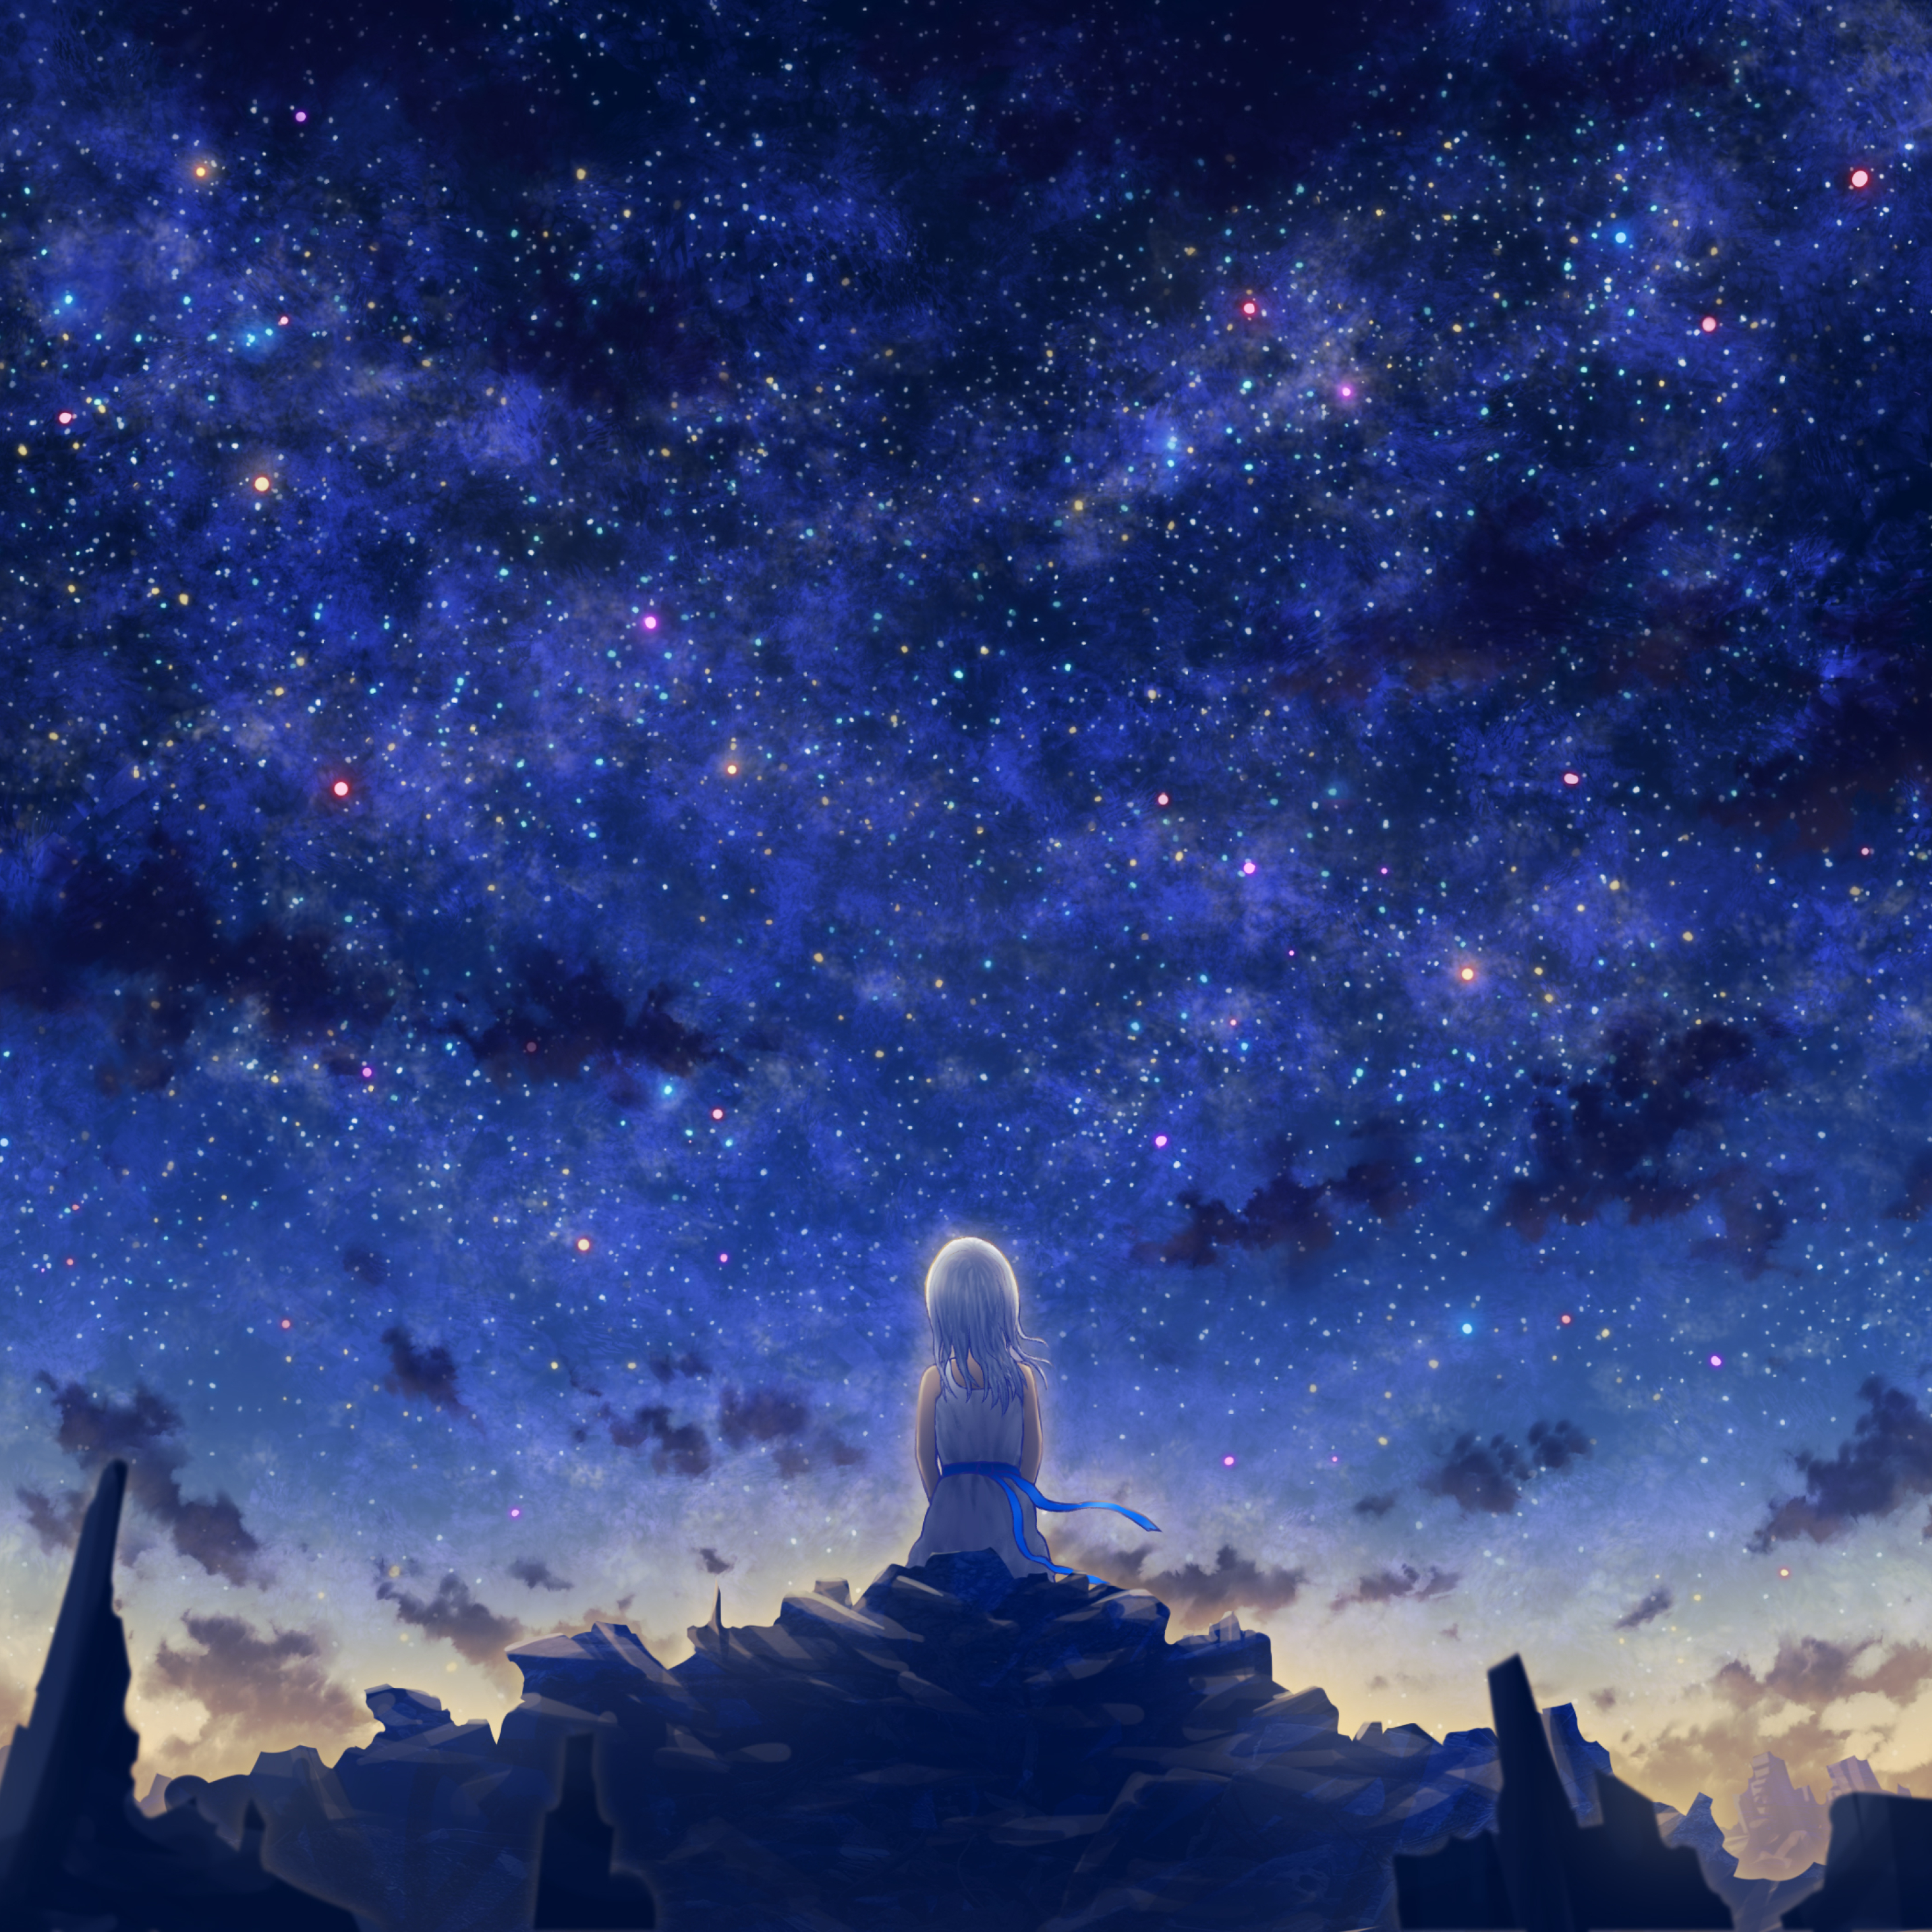 1440x2960 Resolution Anime Girl and Cool Starry Sky Samsung Galaxy Note  9,8, S9,S8,S8+ QHD Wallpaper - Wallpapers Den